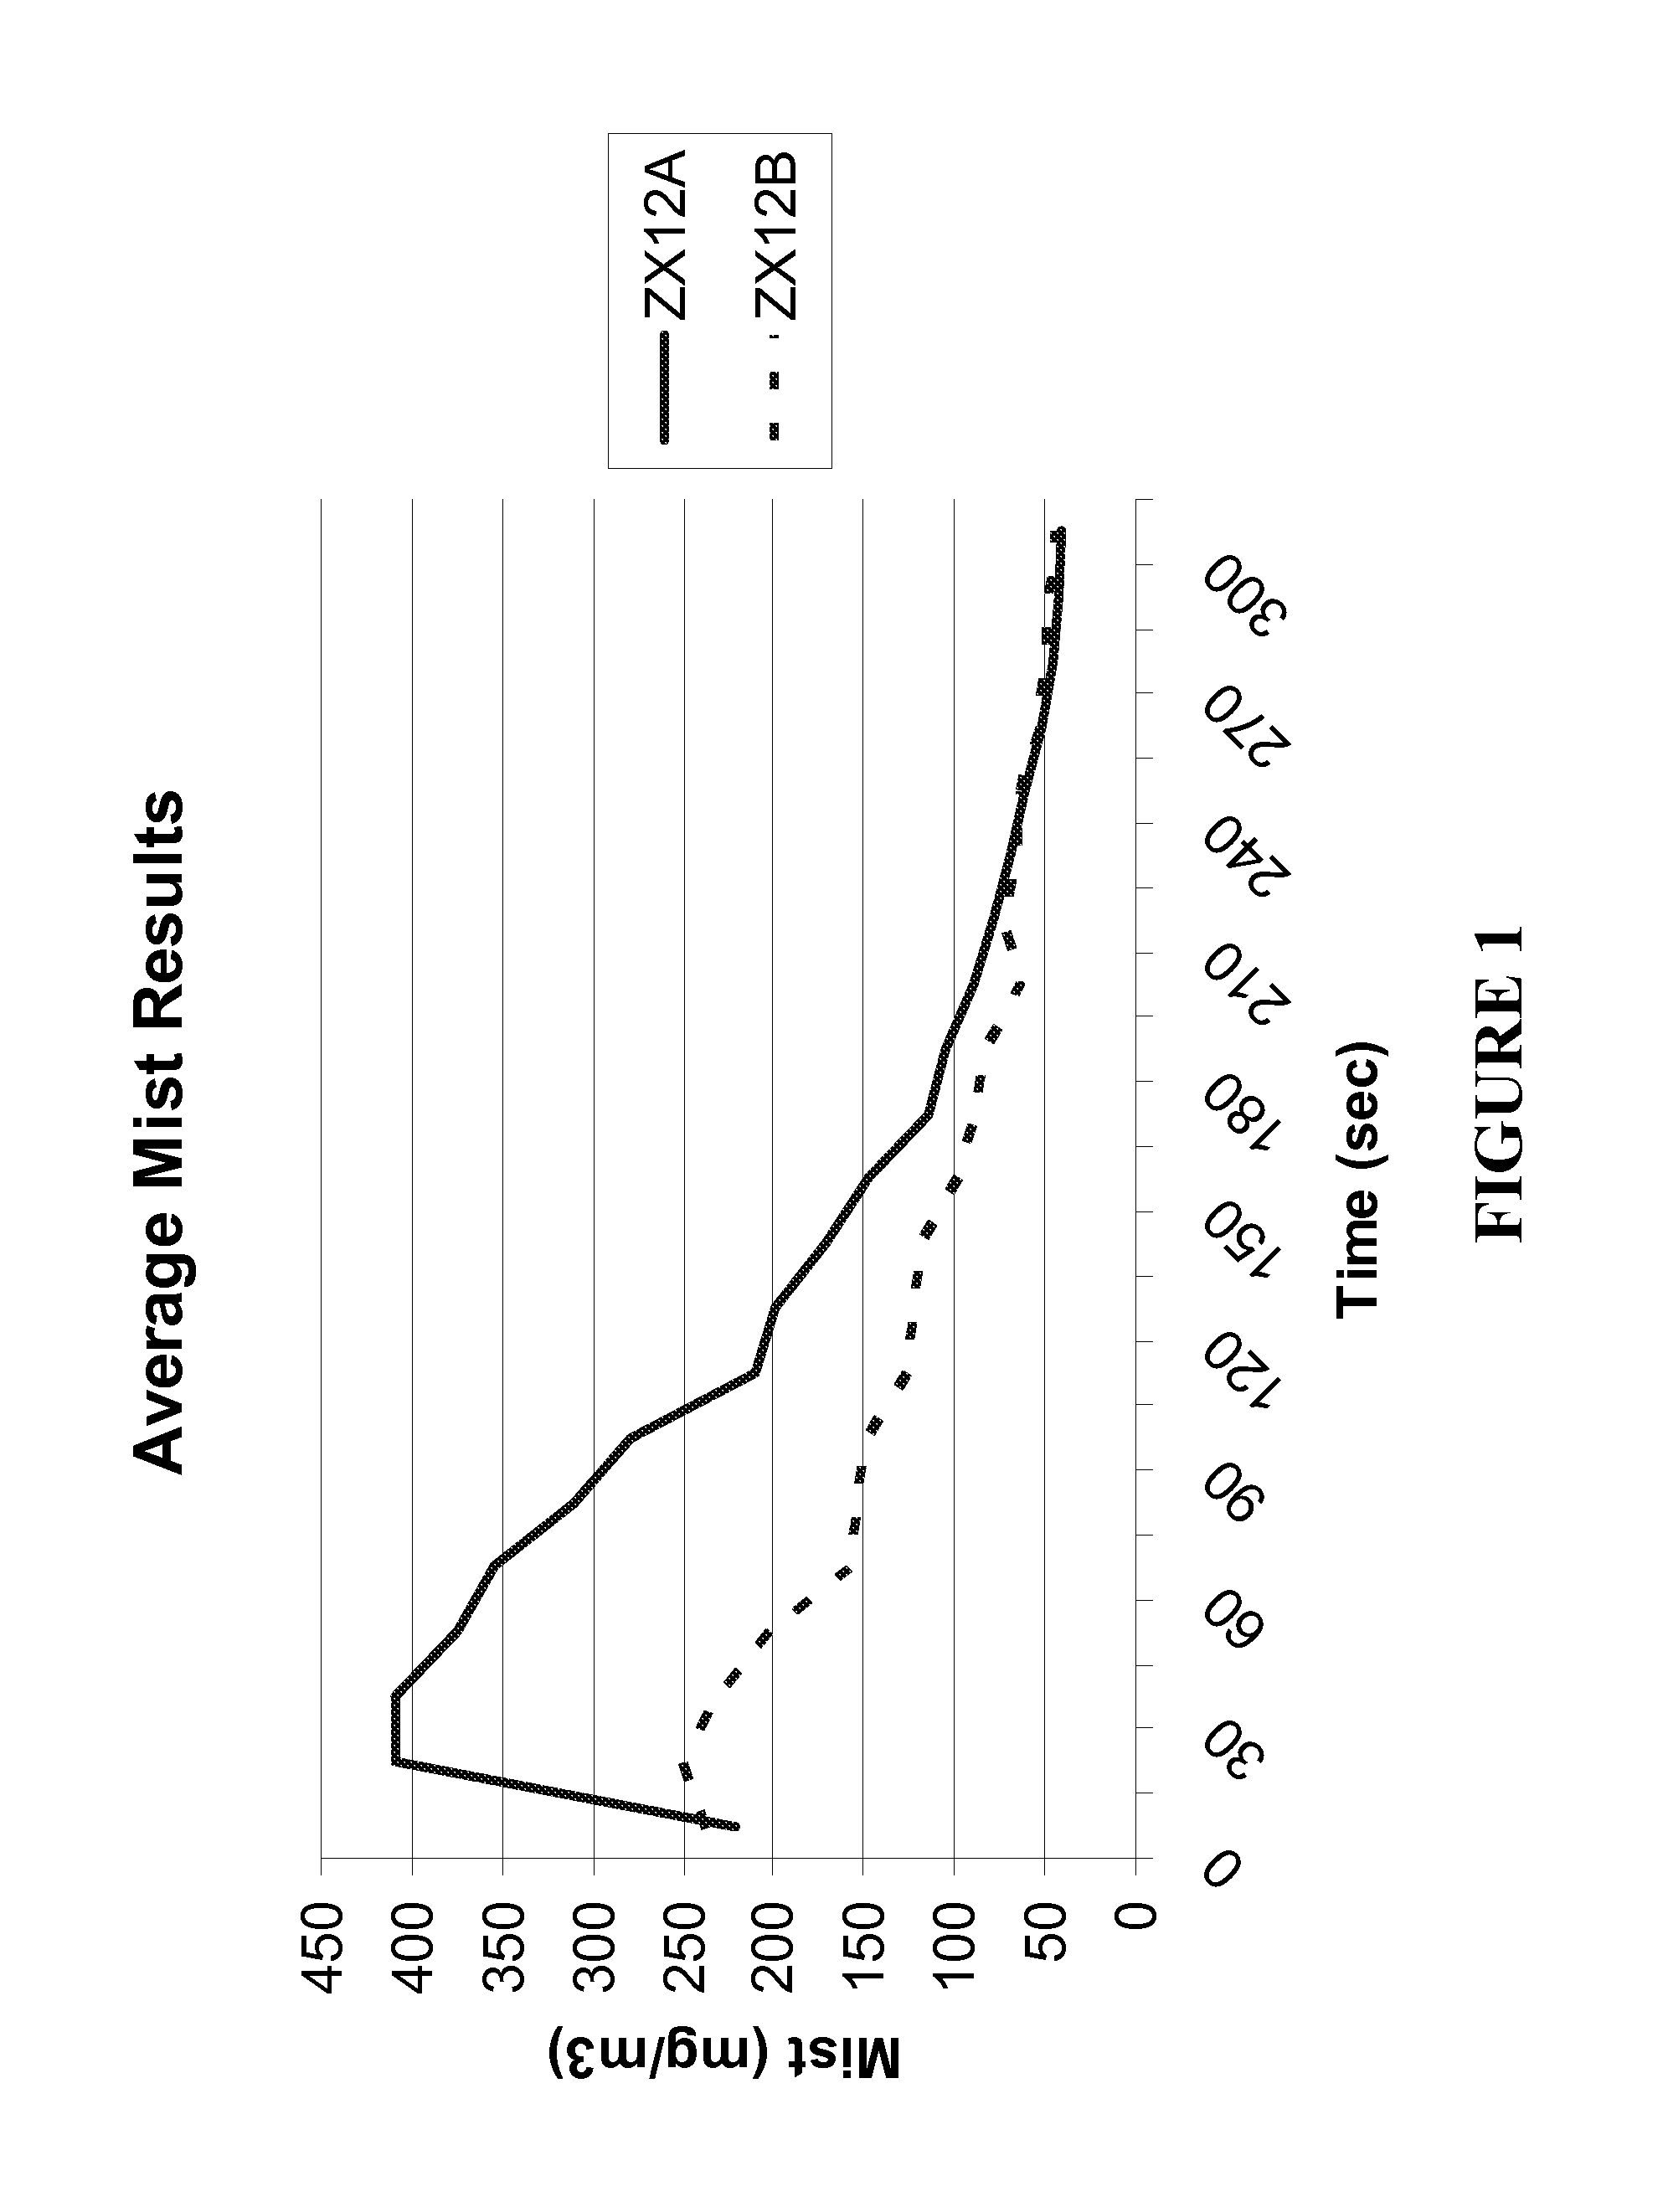 Metalworking fluid compositions and preparation thereof